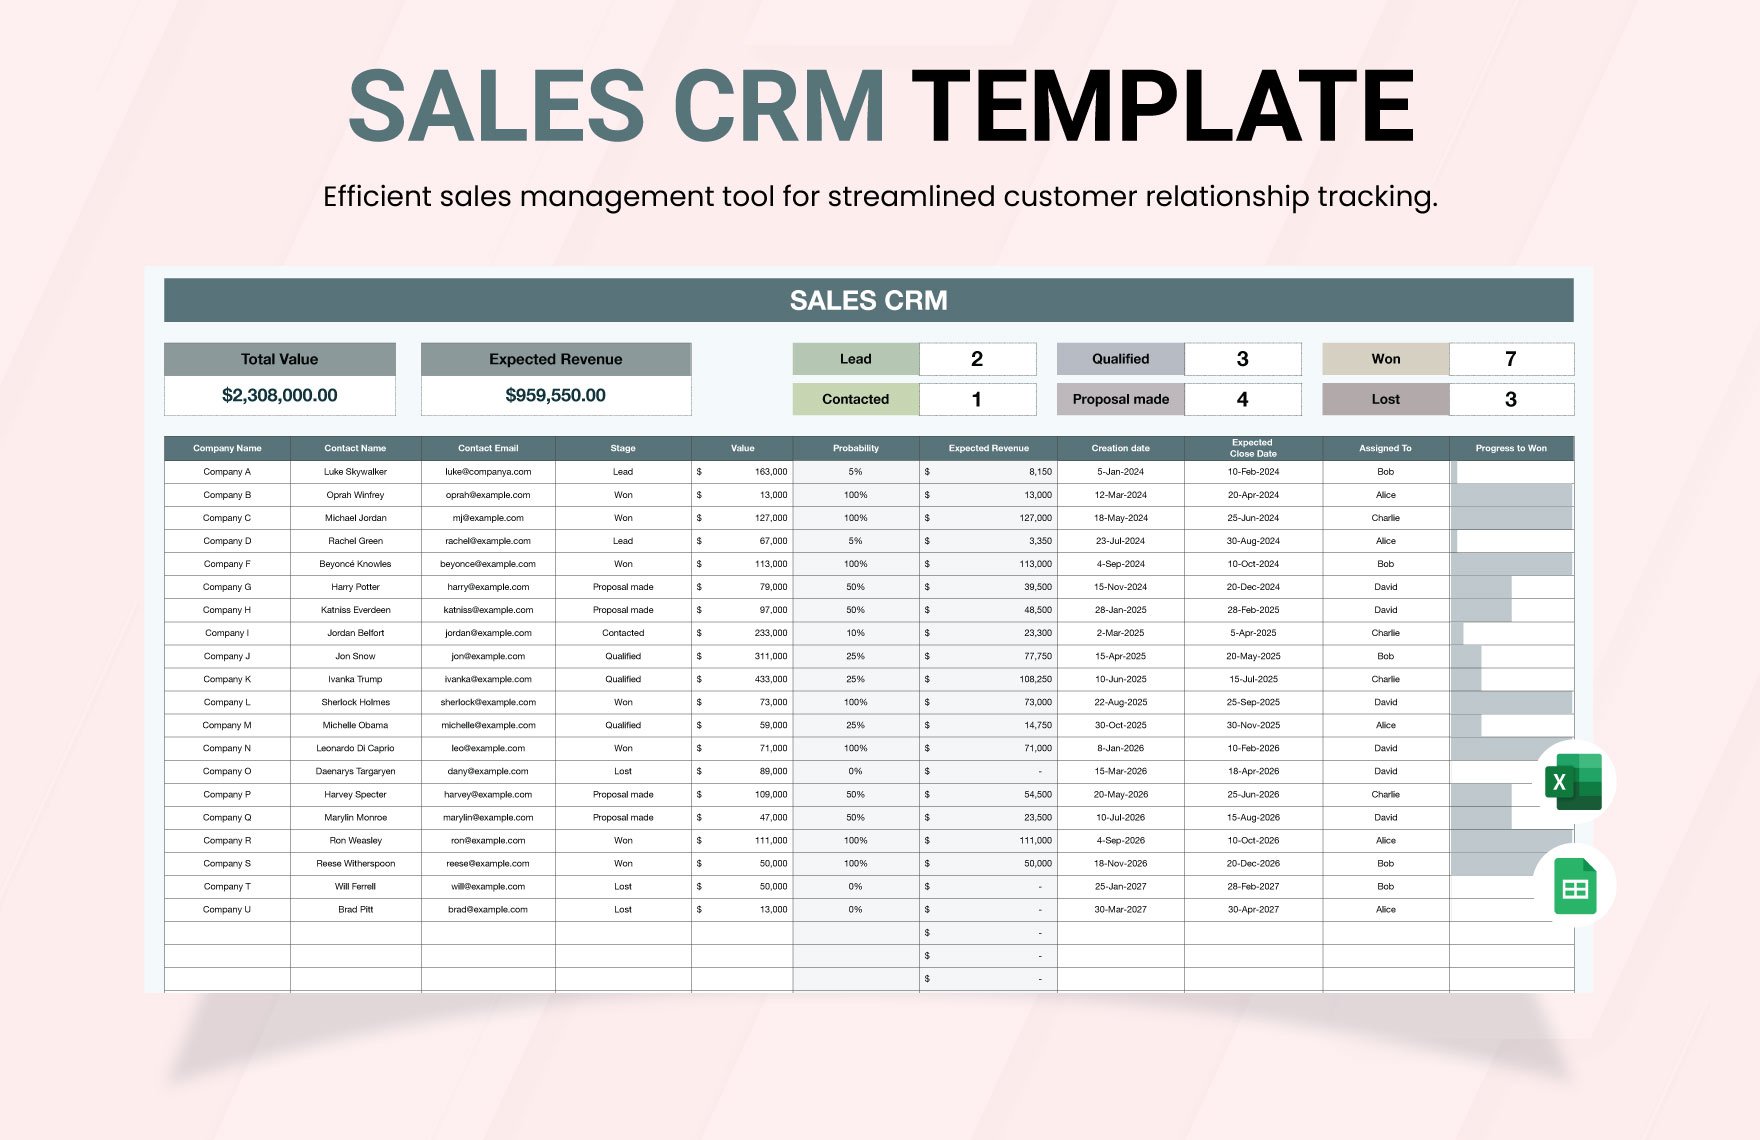 Sales CRM Template in Excel, Google Sheets